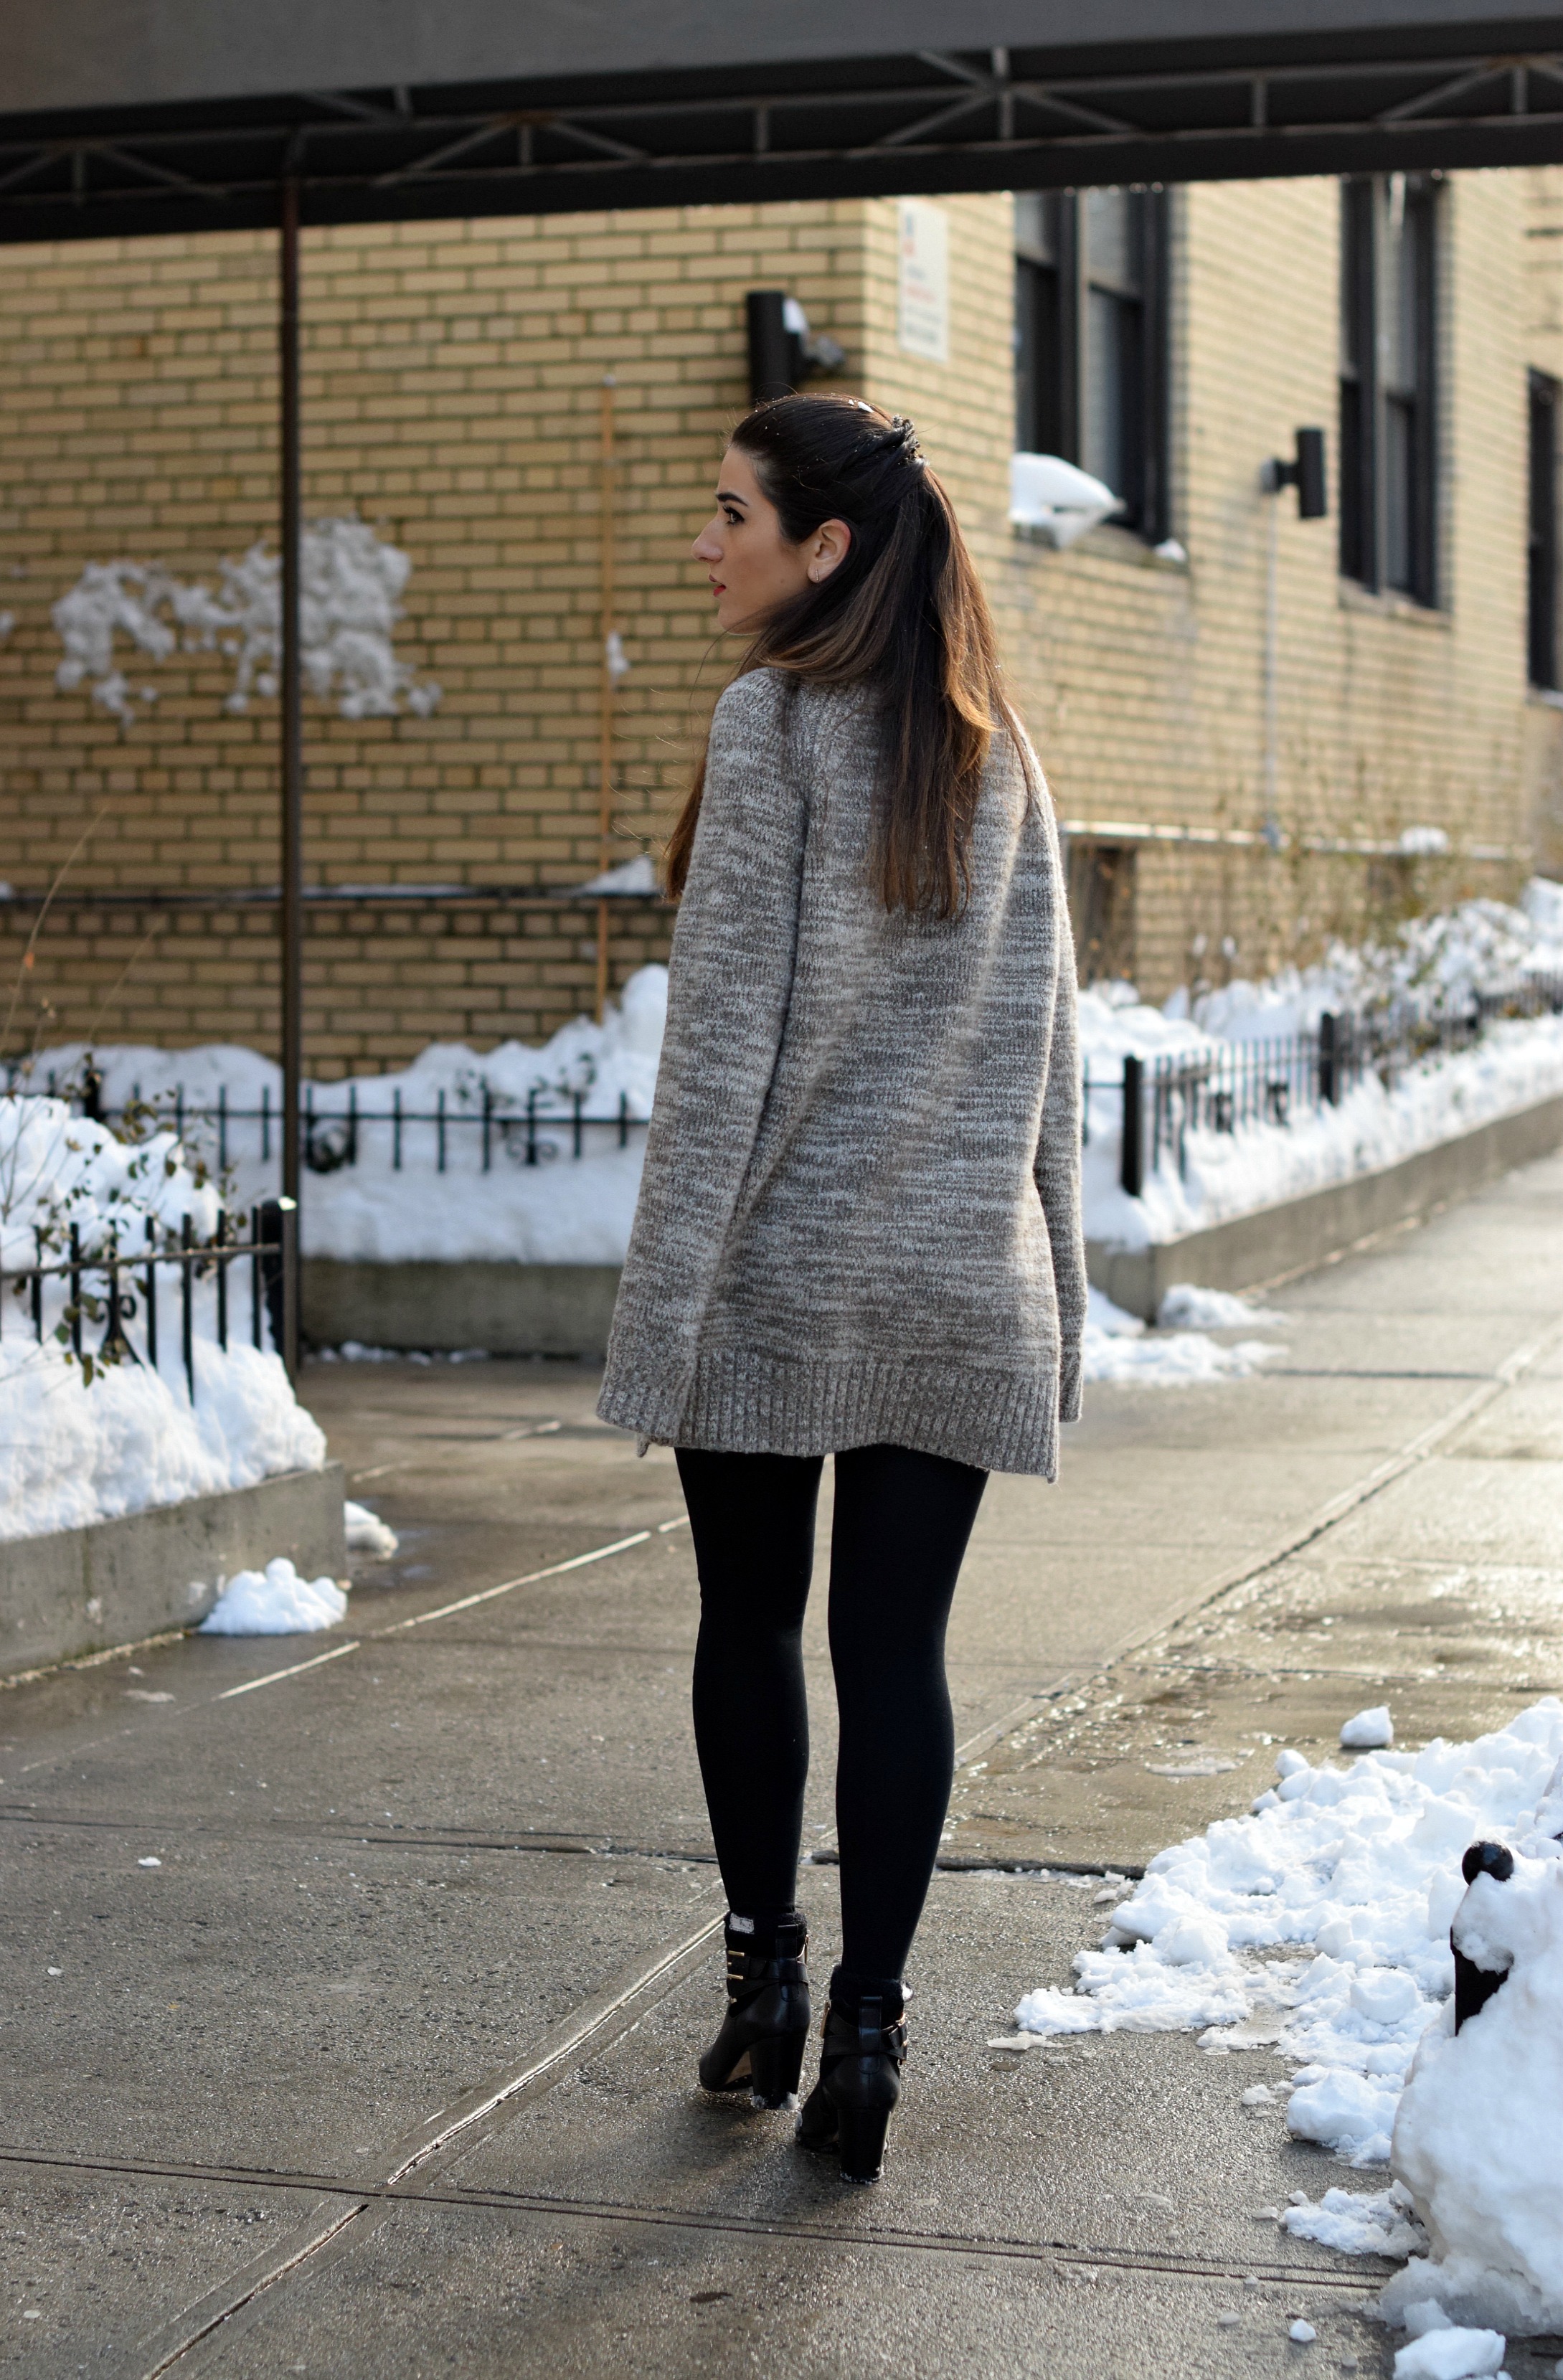 Grey Turtleneck Leggings Louboutins & Love Fashion Blog Esther Santer NYC Street Style Blogger Oversized Sweater Outfit Idea OOTD Black Booties Girl Swag Women Chic What To Wear Shop Inspo Hair Photoshoot NYC Snow Blizzard Jonas Winter Monogram Clutch.jpg